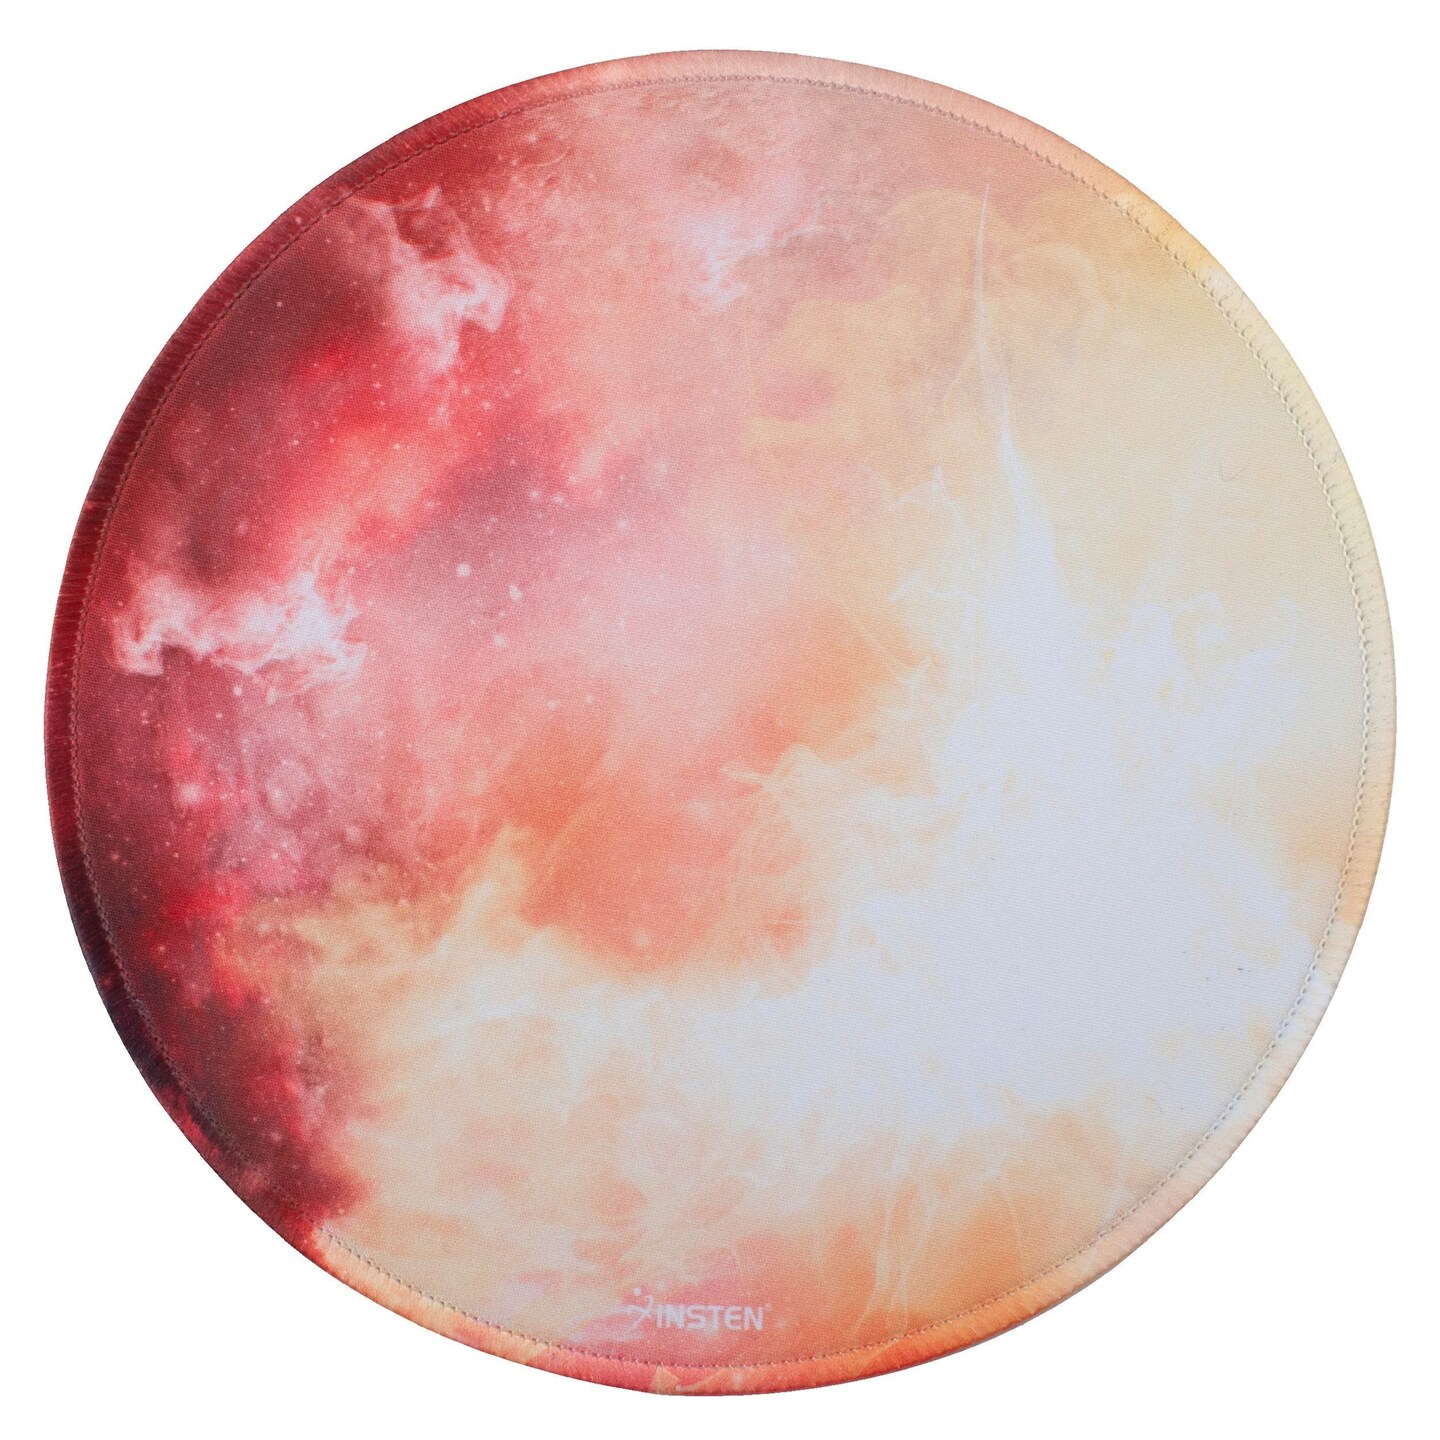 Insten Round Galaxy Mouse Pad for Home Office Gaming Computer Desk, Smooth Non Slip Rubber Moon Mat, Yellow Mars